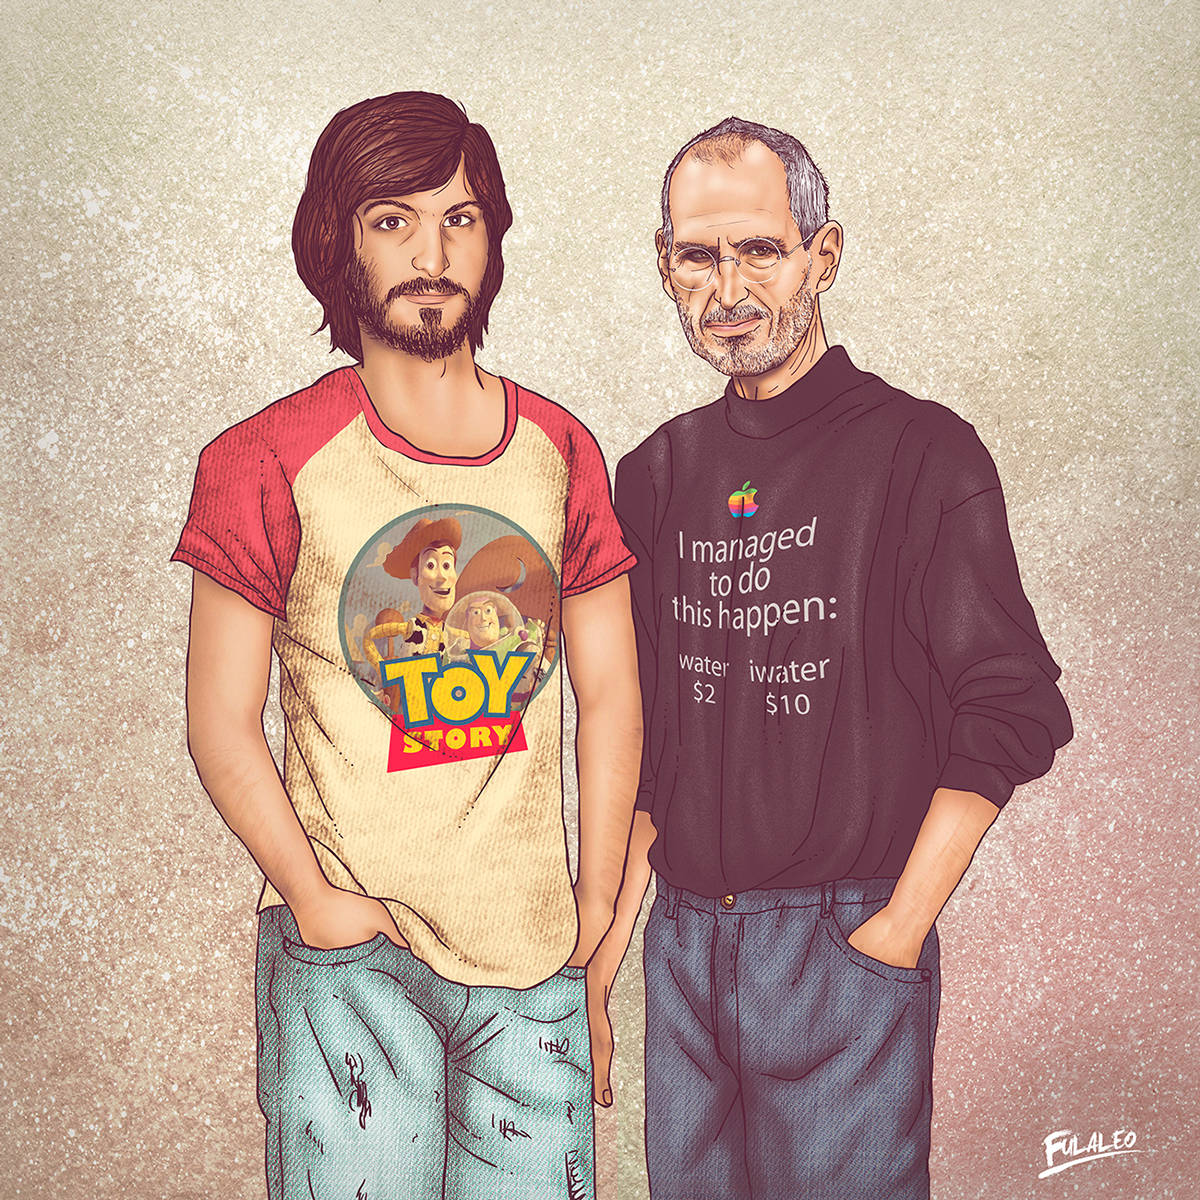 Steve Jobs before and after, with maybe a little judgement about water sales.